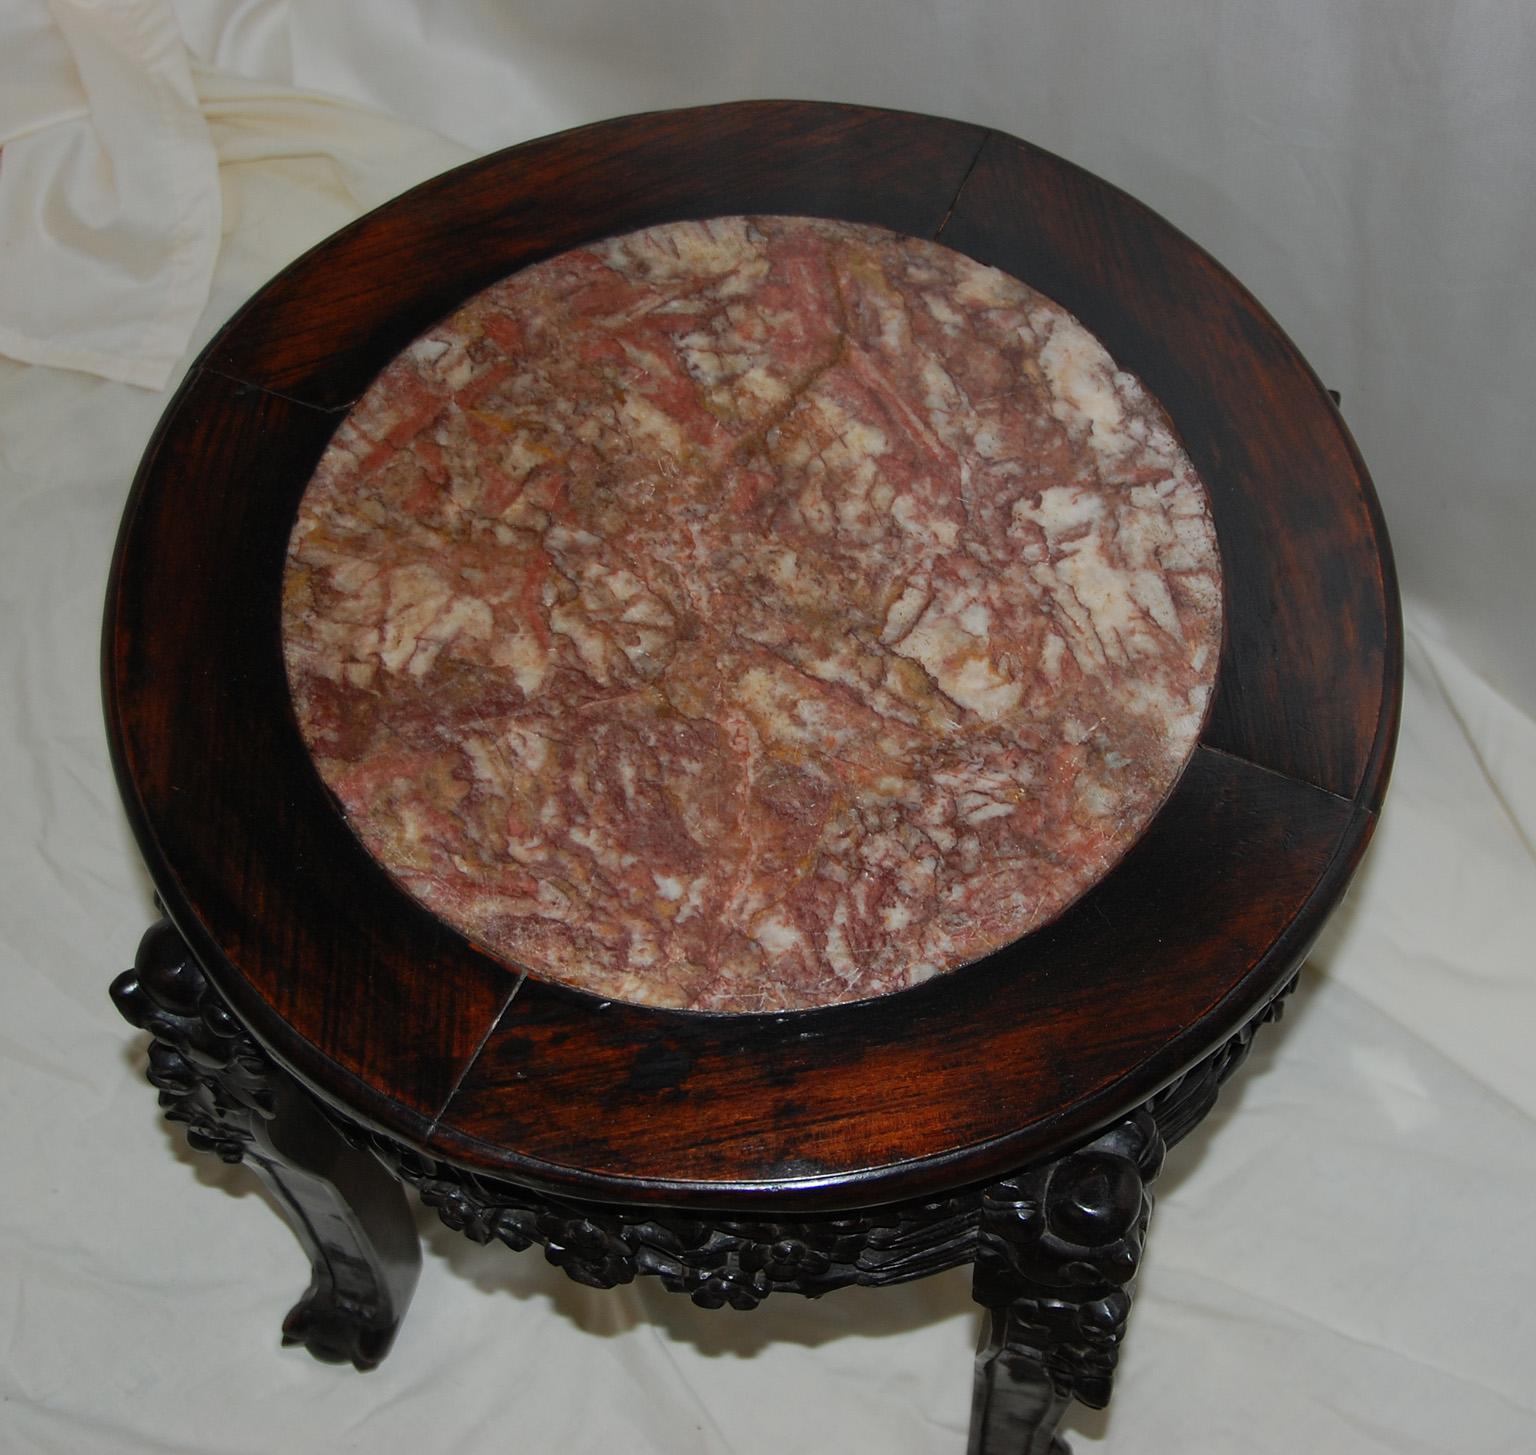 Chinese Qing dynasty rosewood carved stool with rose marble inlaid seat. The intricate carving contrasts beautifully with the round rose marble inlay of the seat. This stool can easily be used as extra seating, a pedestal for a plant or piece of